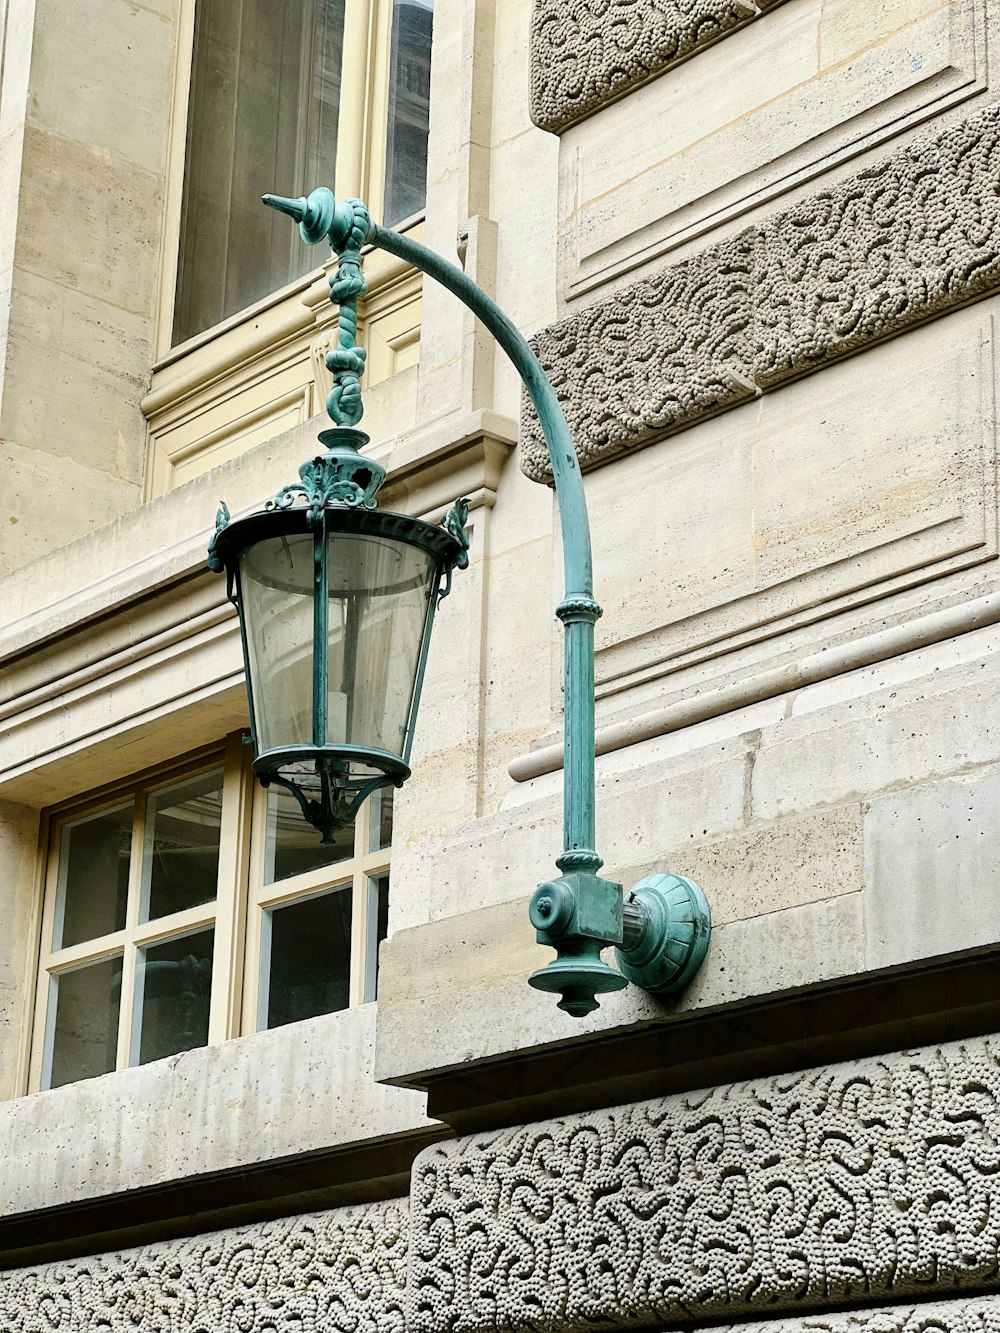 a street light on the side of a building